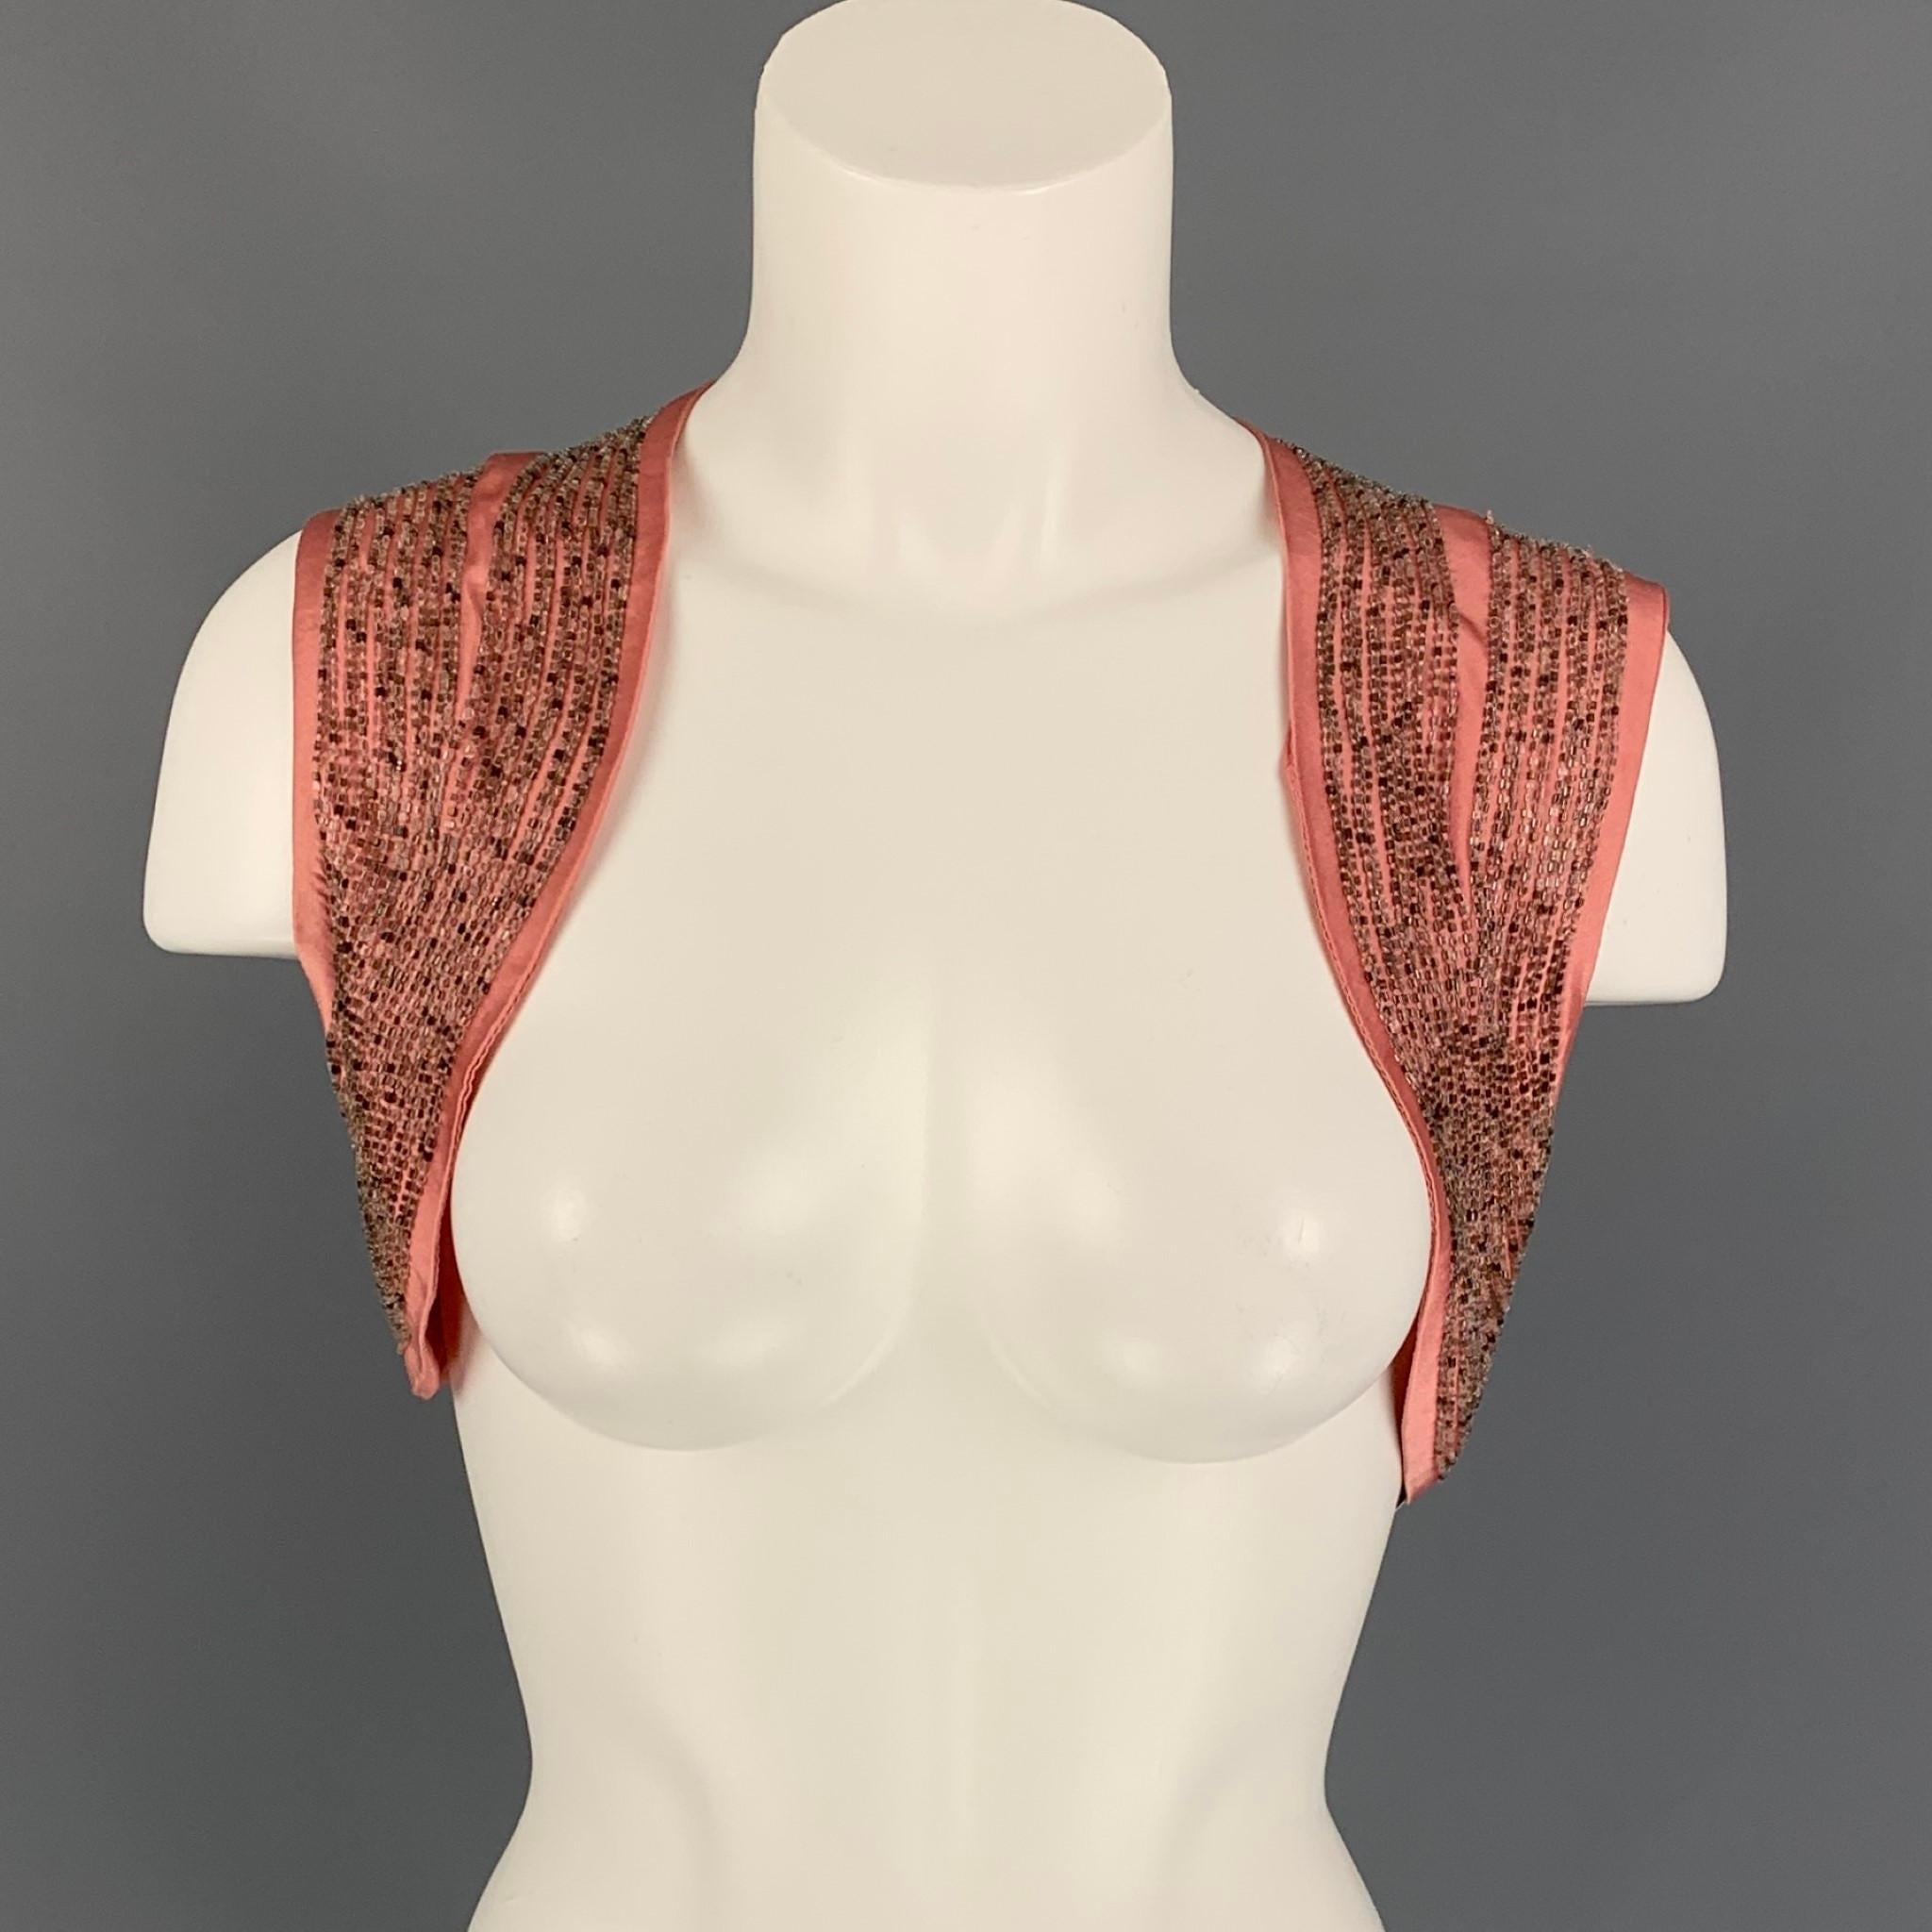 DRIES VAN NOTEN vest comes in a pink silk with a full liner featuring a beaded design throughout and a open front. Made in Belgium. 

Very Good Pre-Owned Condition.
Marked: 38

Measurements:

Shoulder: 14 in.
Length: 10 in. 